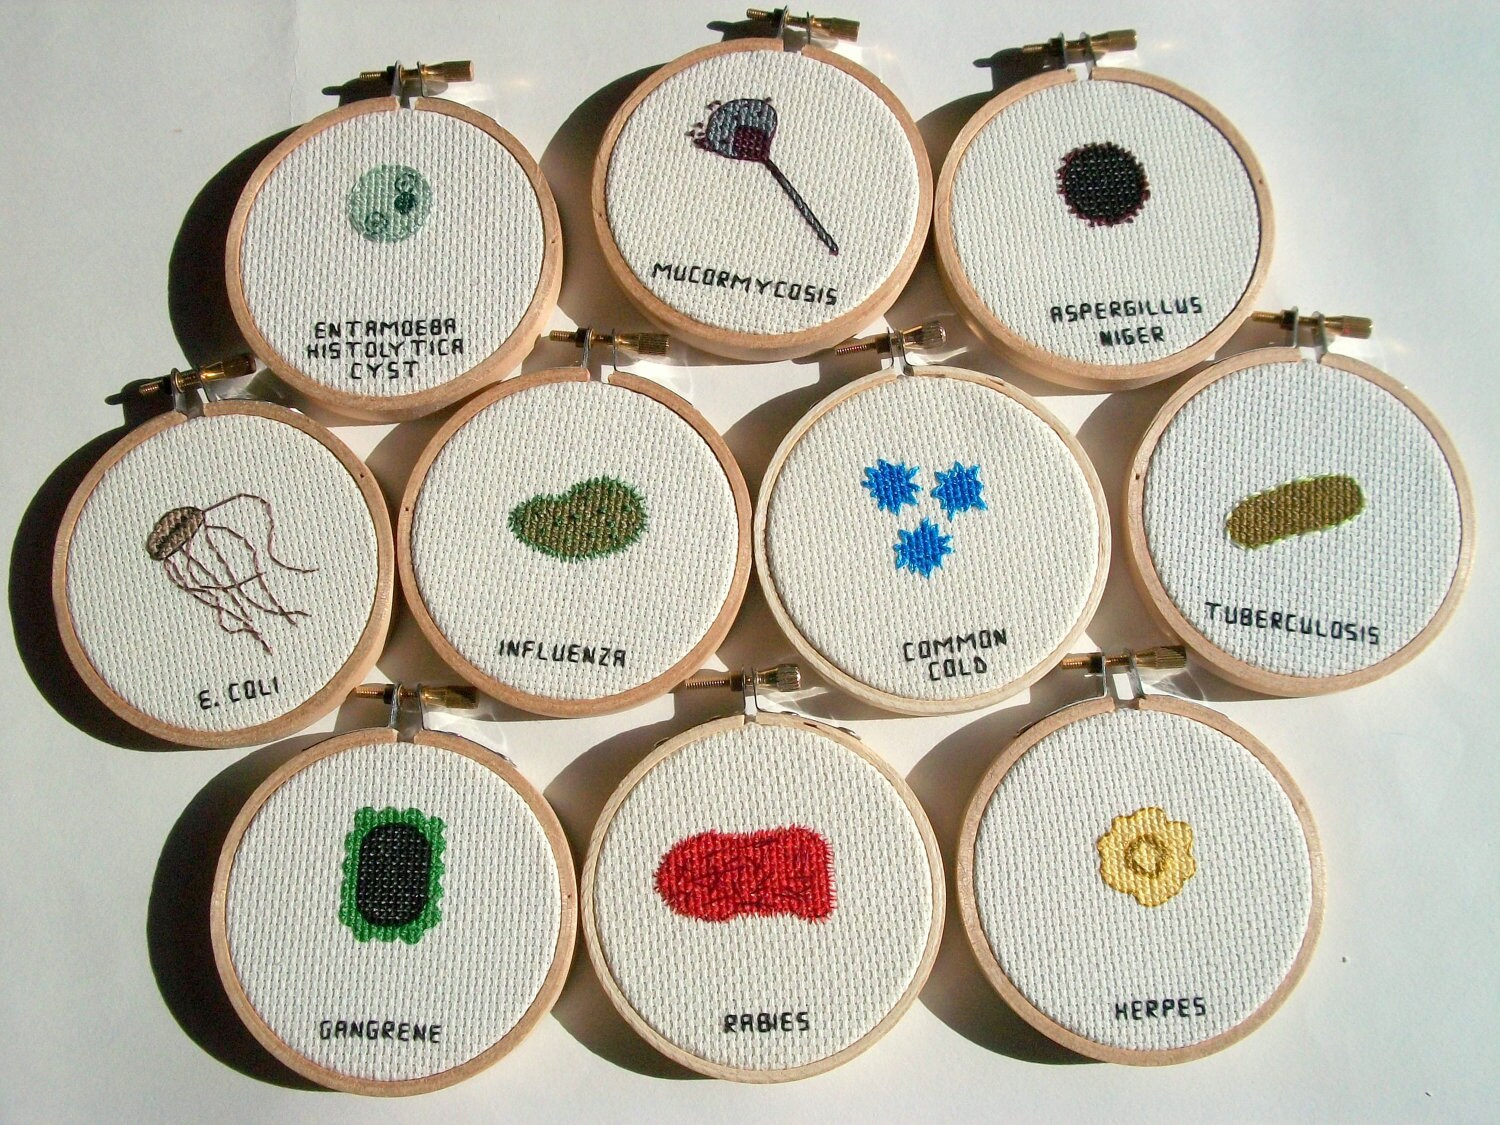 Any 5 Microbes cross stitch set -- instant collection of common germs, microbes for your wall